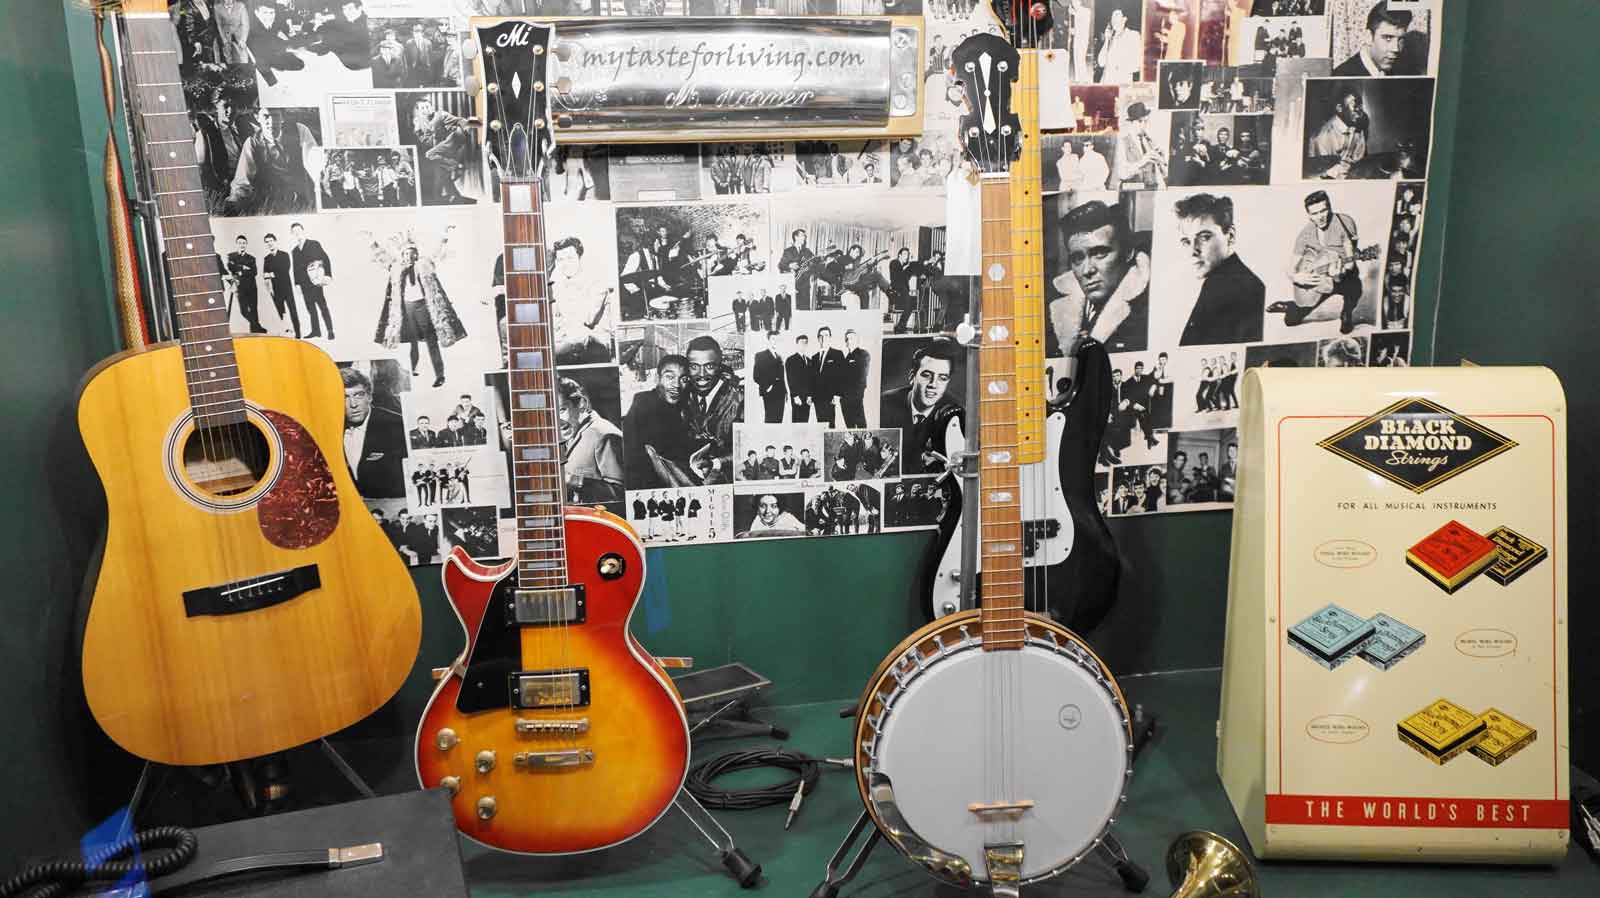 The Beatles Story is located in Liverpool, UK, on the historical Royal Albert Dock. The exhibition is entirely dedicated to the legendary band and will immerse you in the times, culture and music of the Beatles.